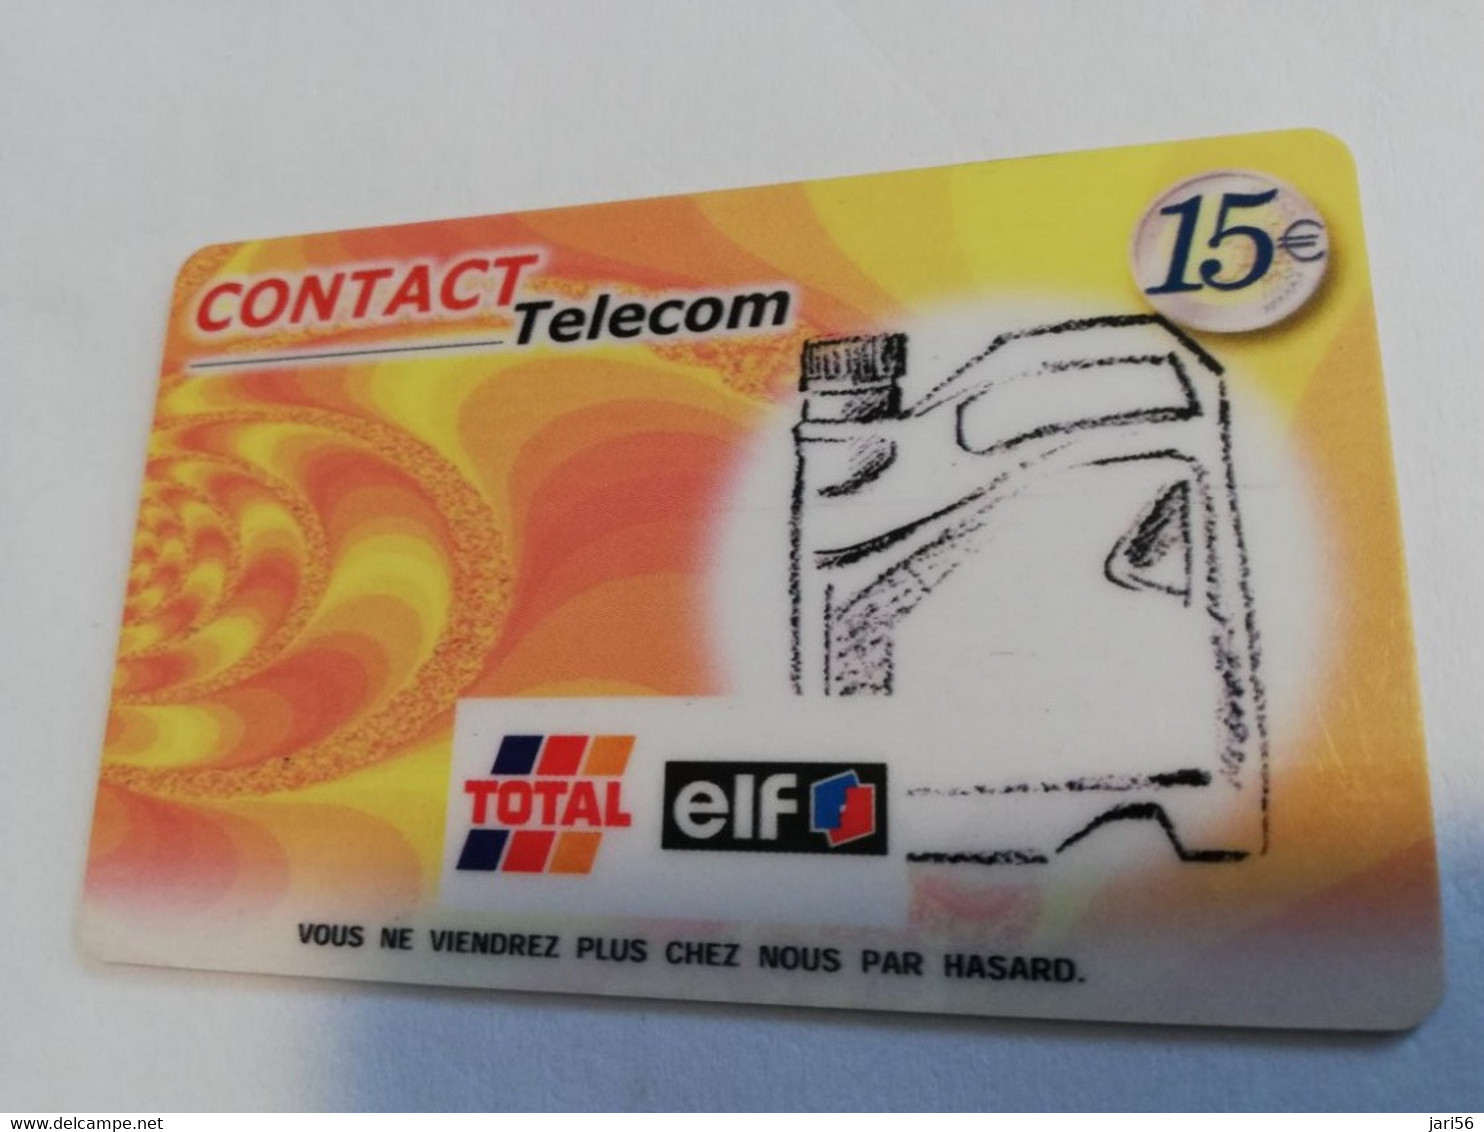 ST MARTIN FRENCH SIDE 3CARDS  SERIE € 5,-+ € 10,-+ € 15,-  GAS STATION TOTAL/ELF   CONTACT TELECOM    **6579 ** - Antilles (Françaises)